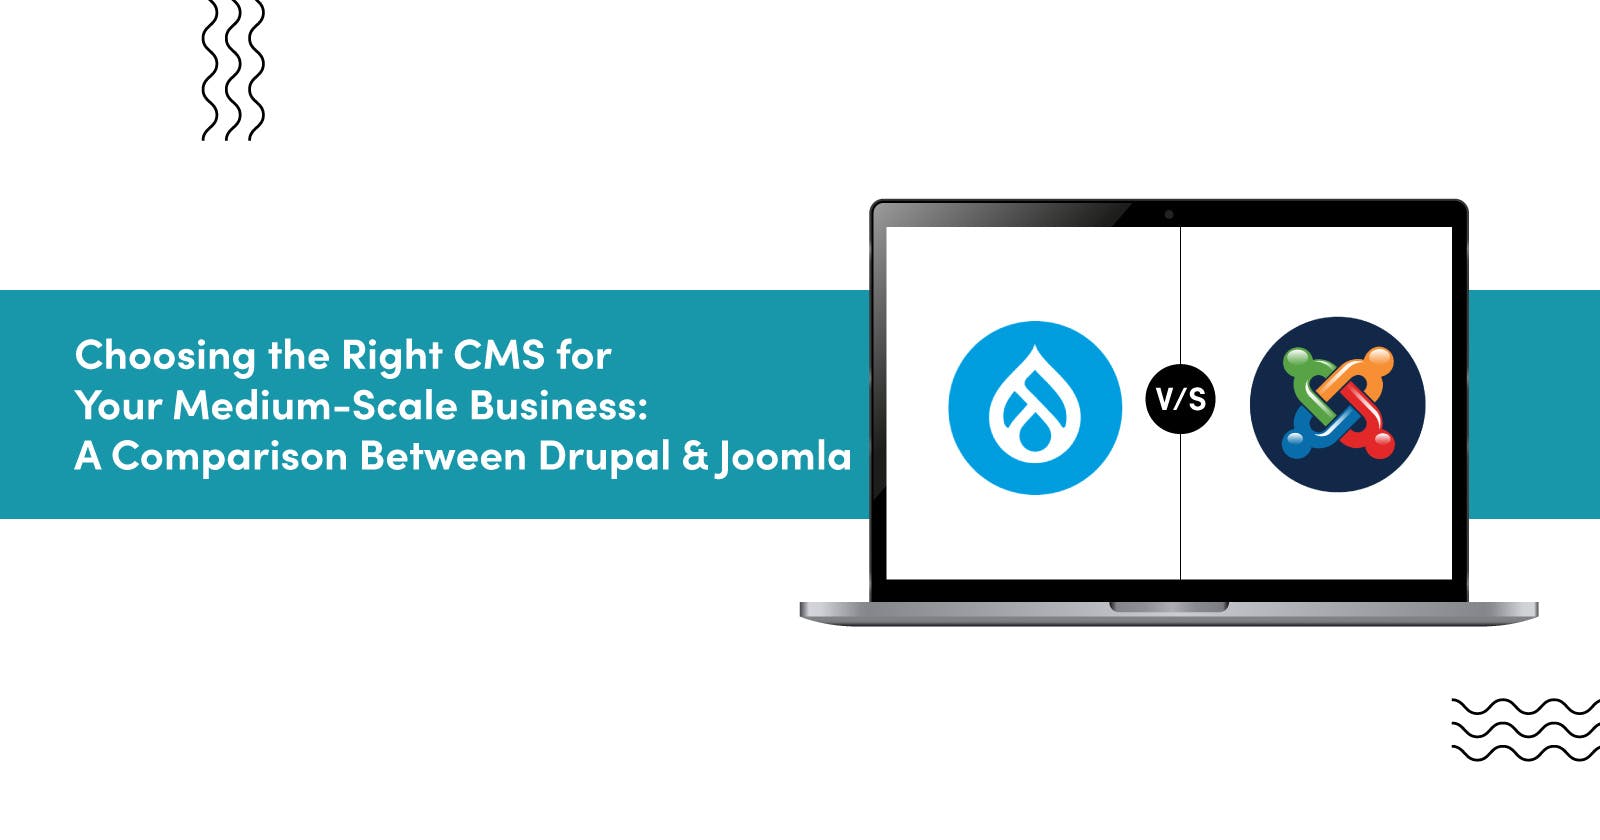 Comparing Drupal vs. Joomla- The Best Choice to CMS for Medium-Scale Businesses